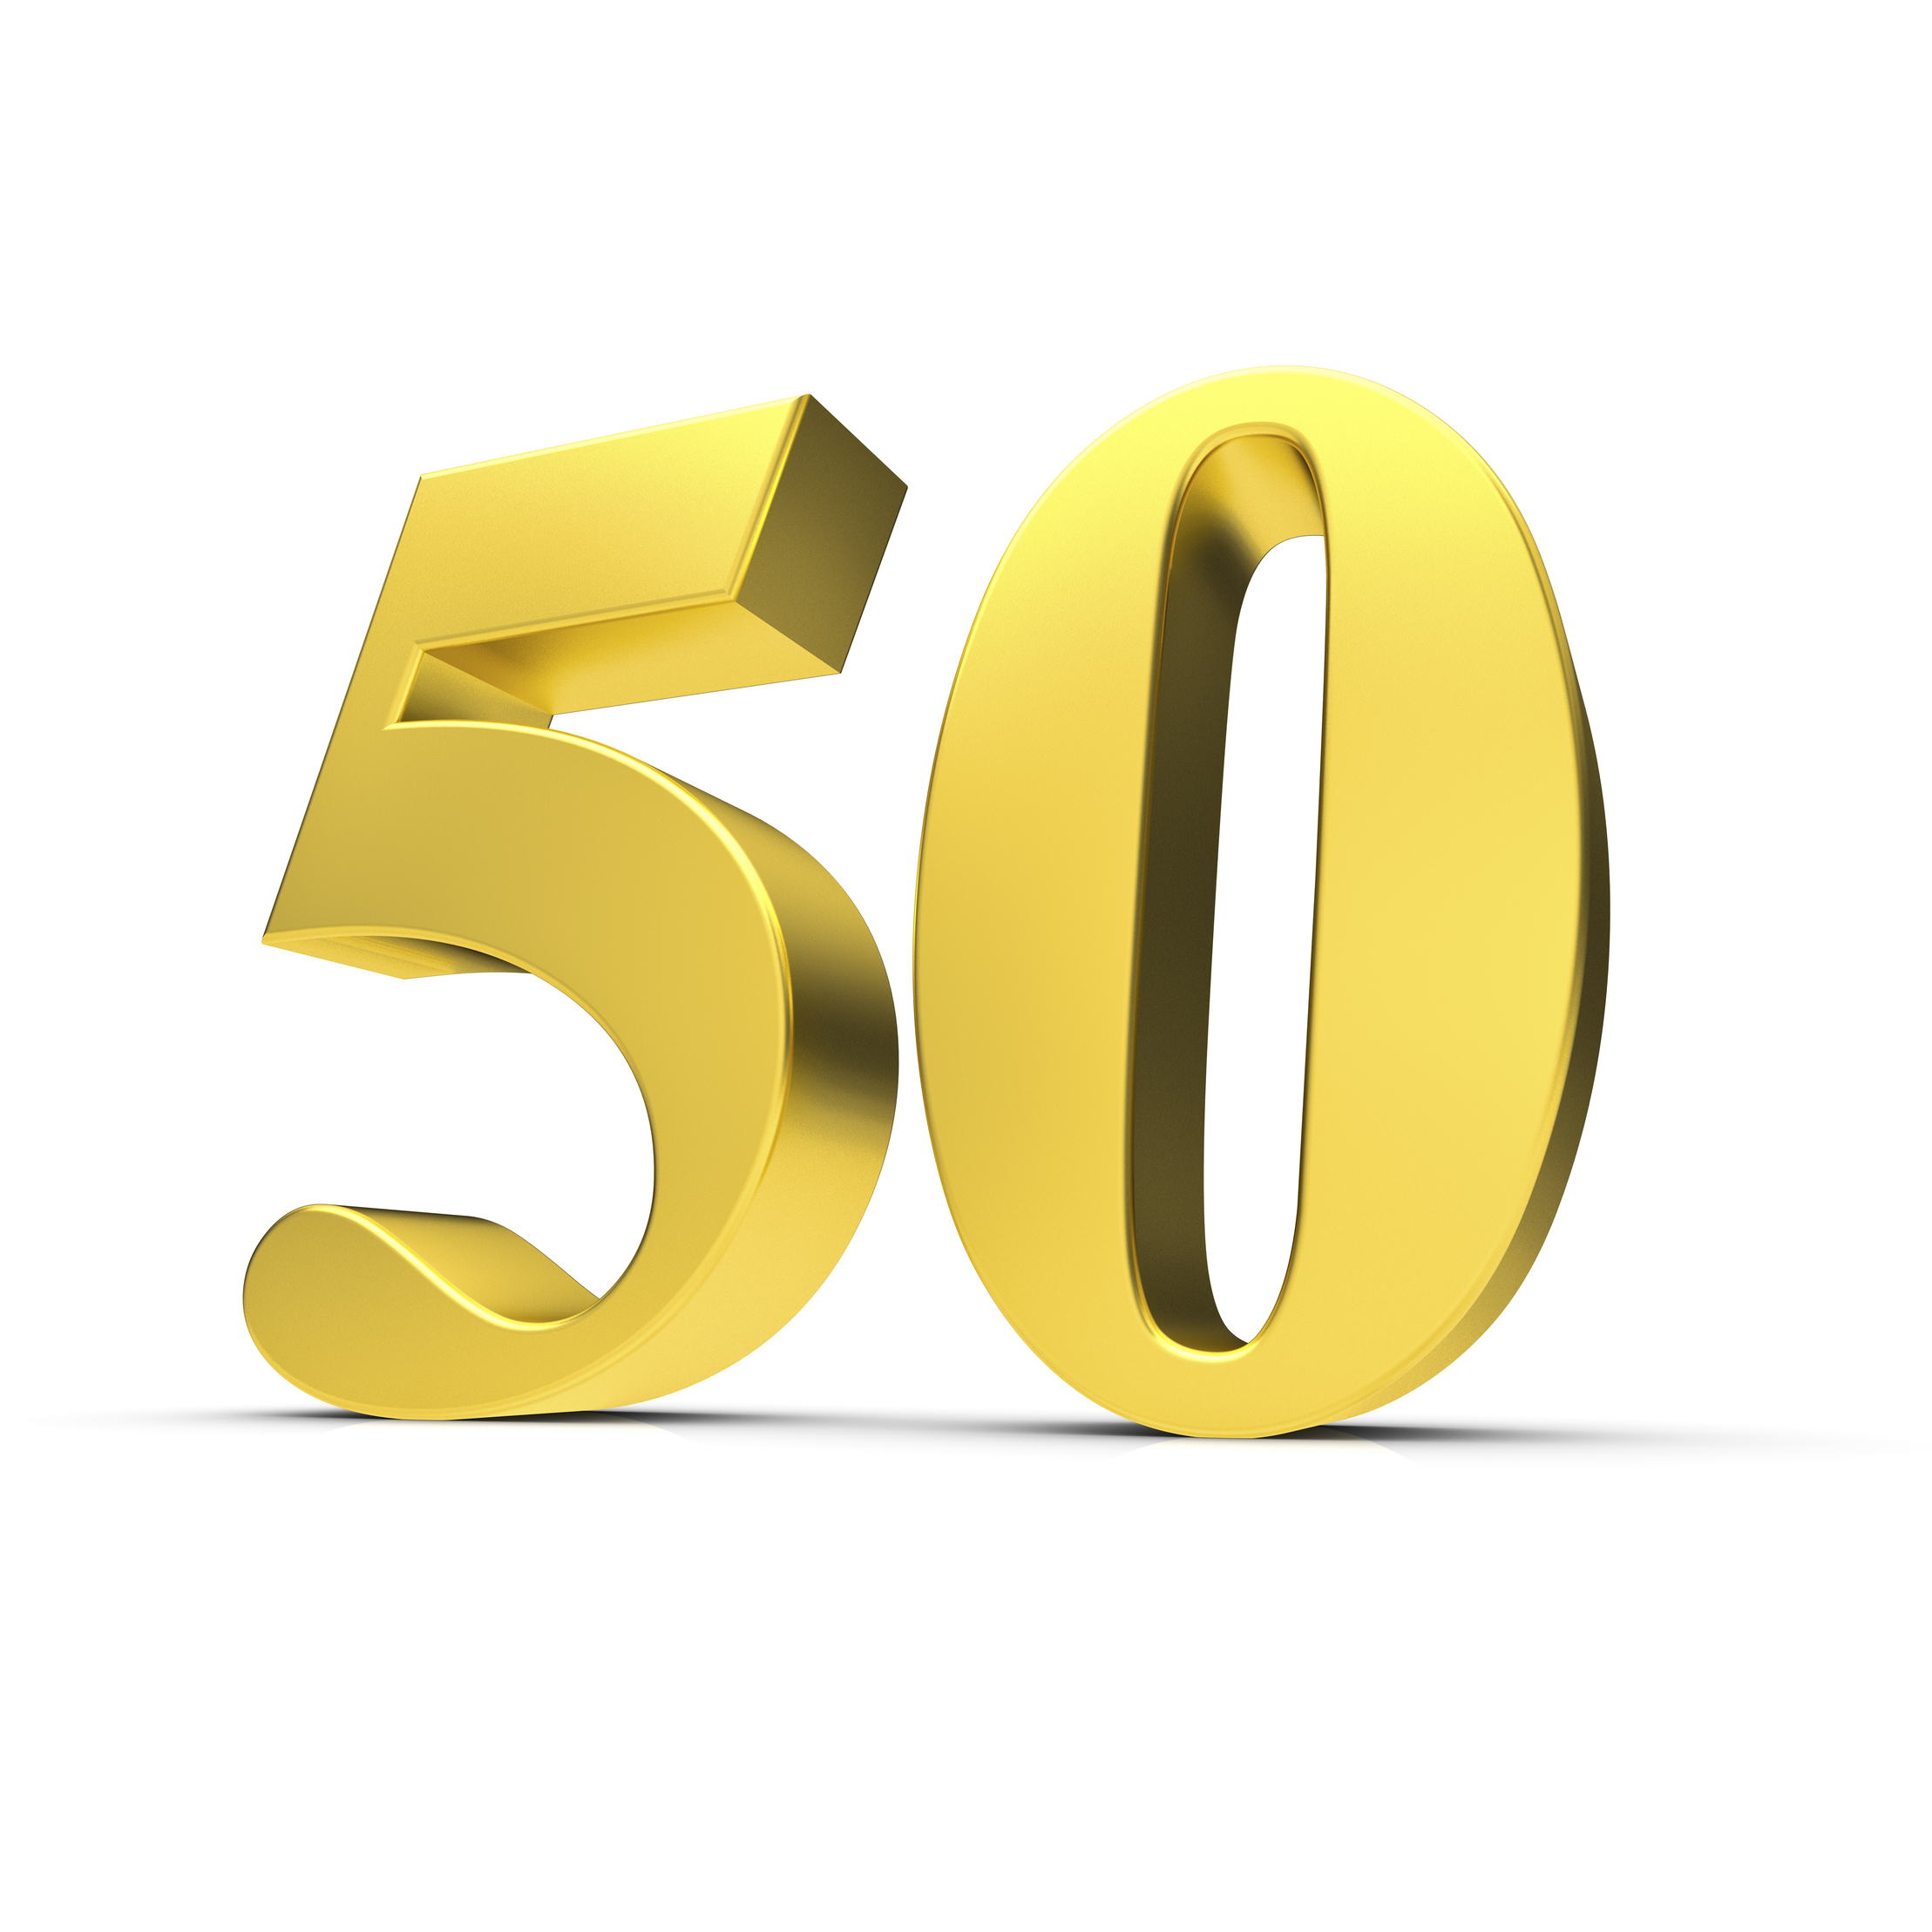 What happens at that 50th employee? - The Orsus Group